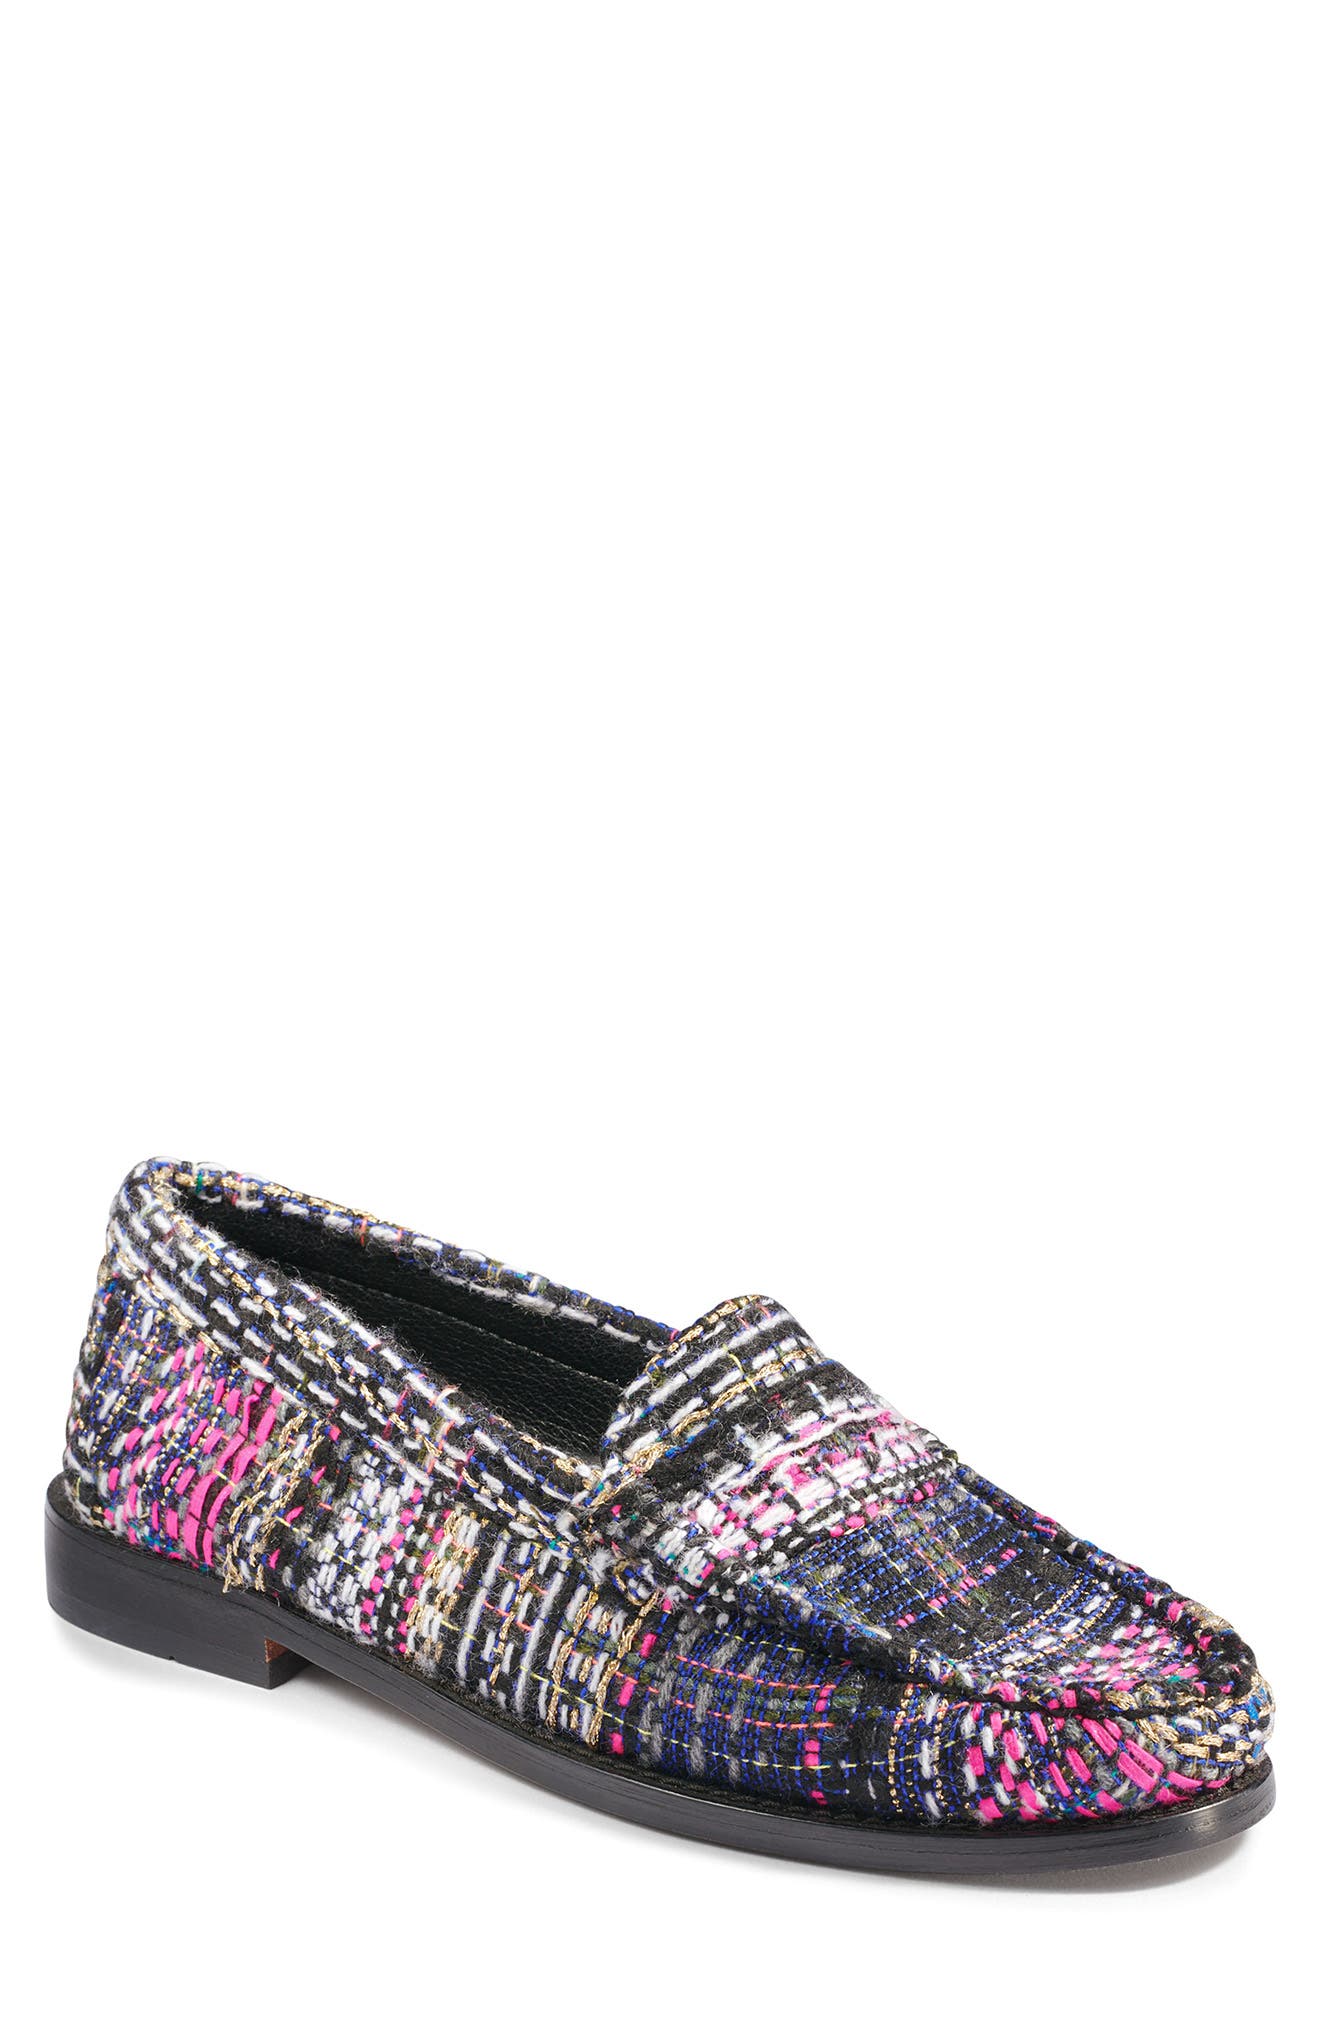 G.H. Bass Originals G.H. Bass & Co. Whitney Tweed Loafer in Multi Wool at Nordstrom